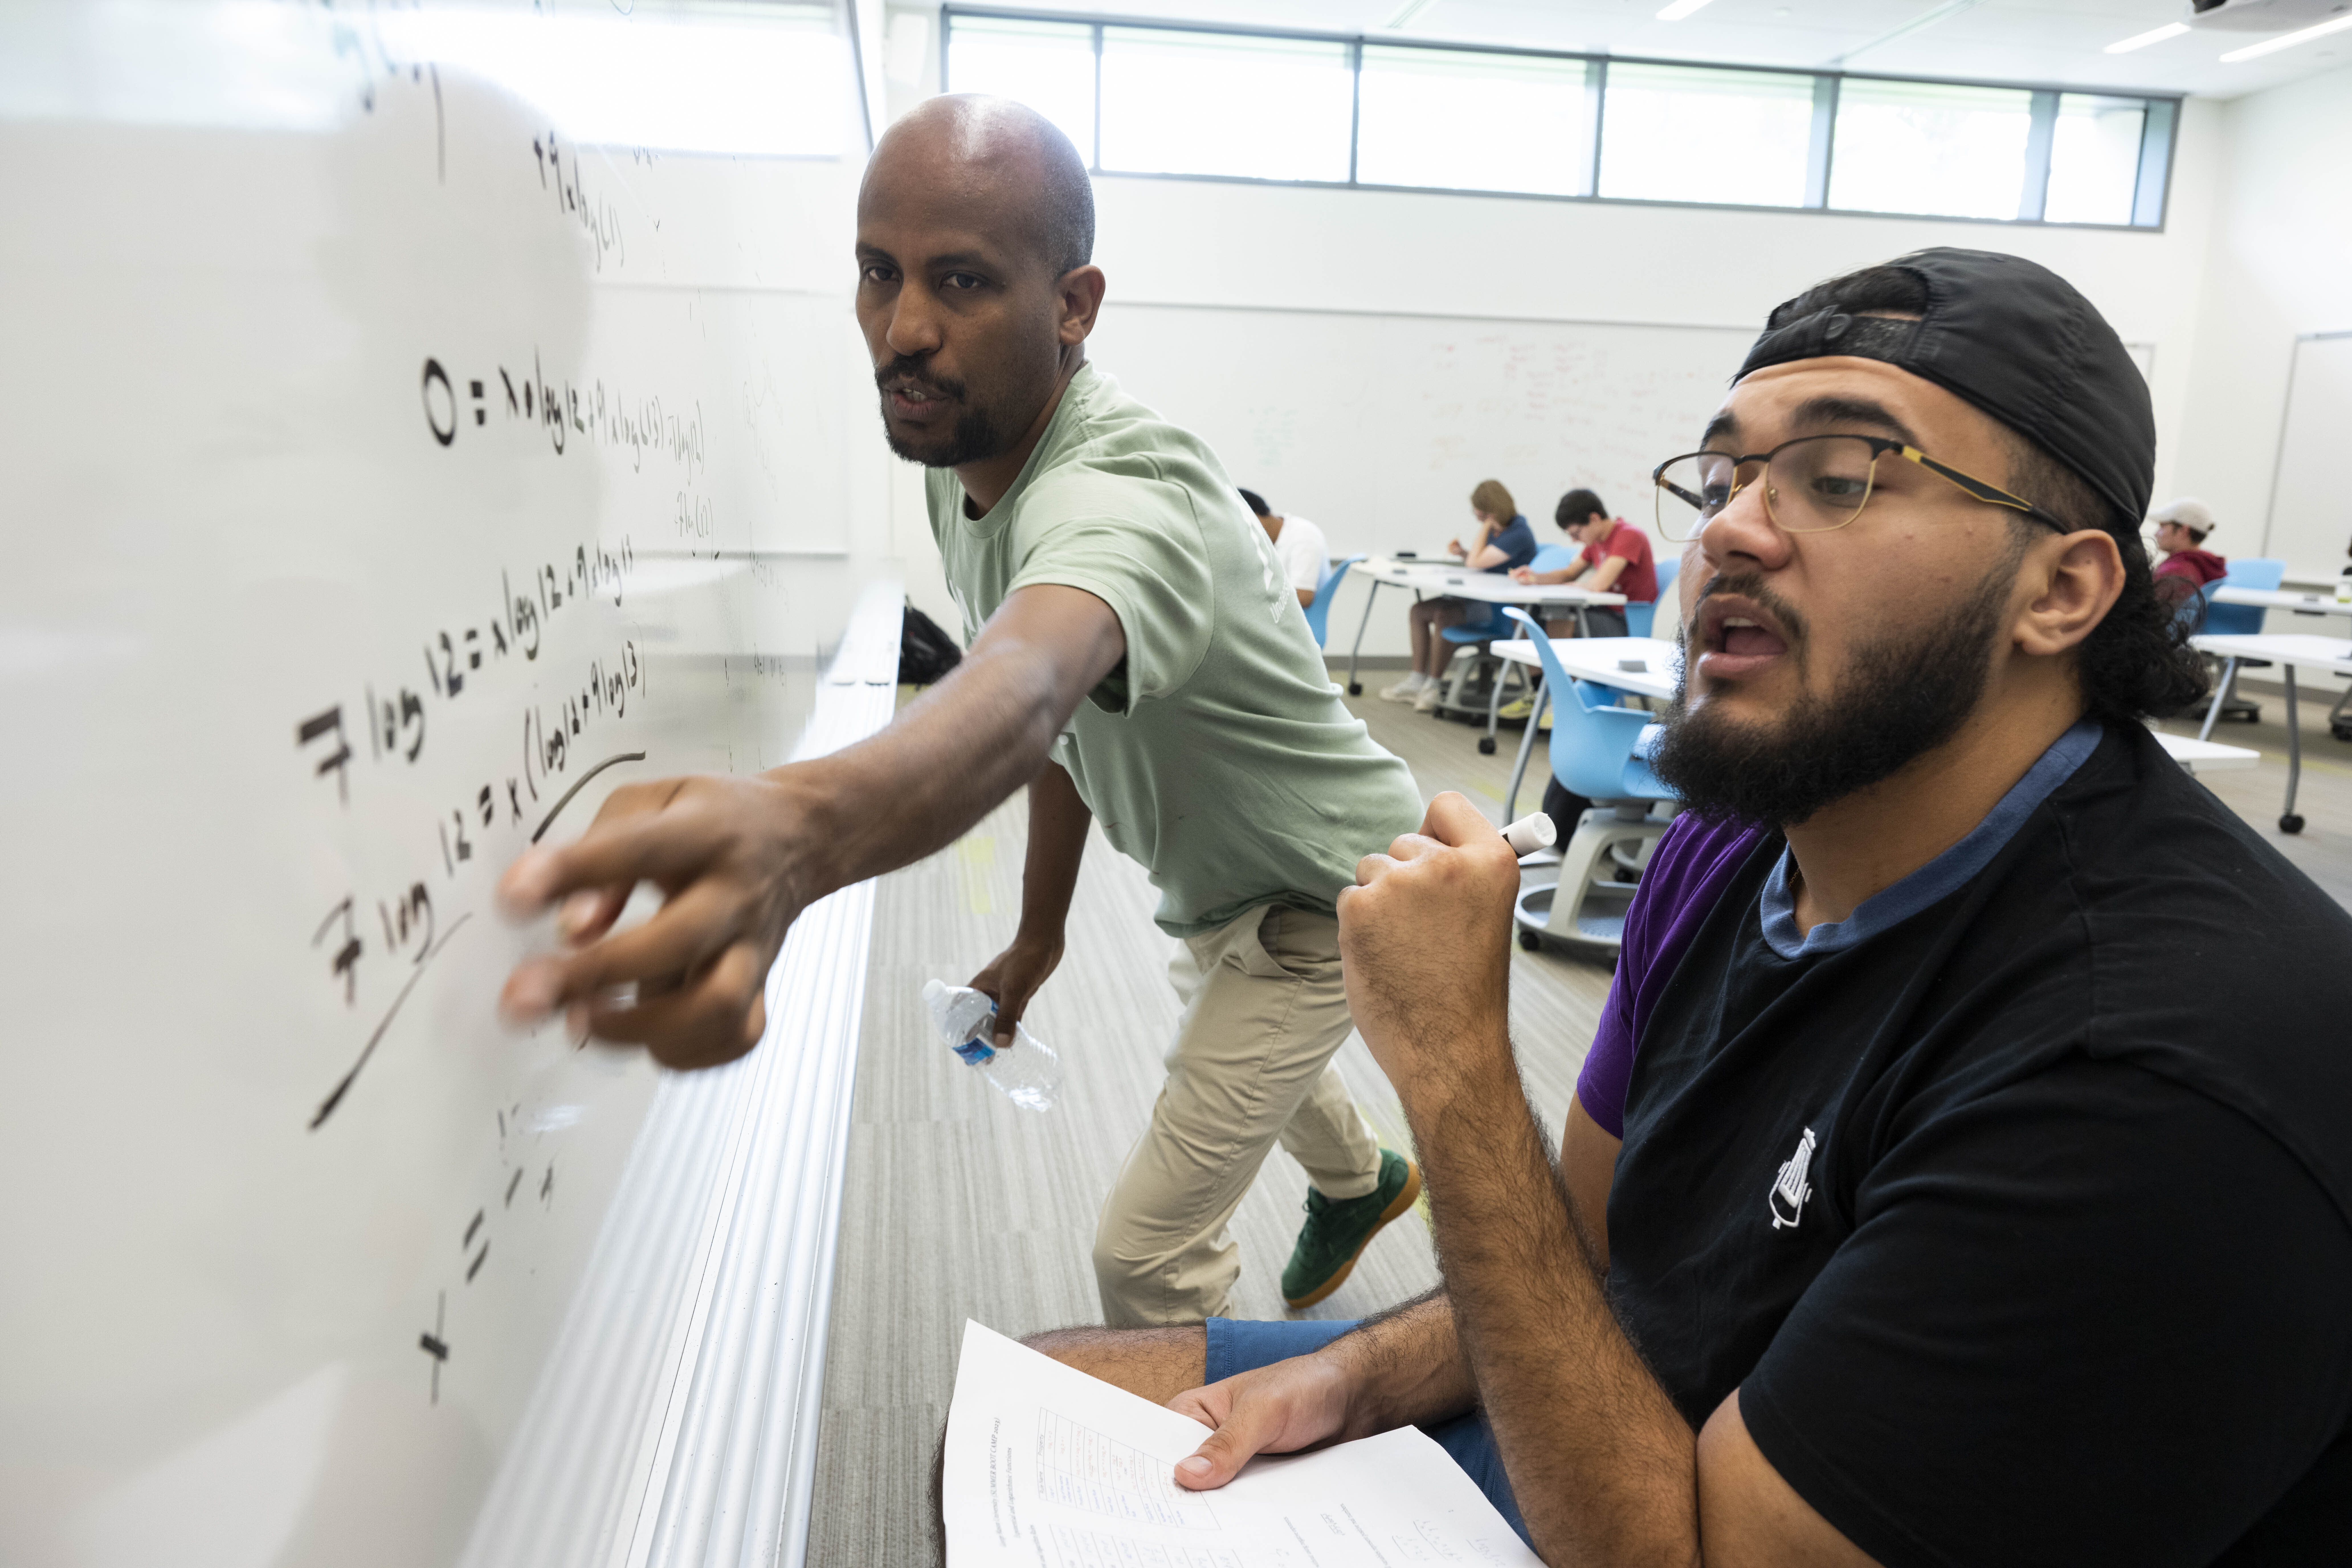 George Mason Term Instructor Ermias Kassaye, left, helps a student figure out an equation during a ...